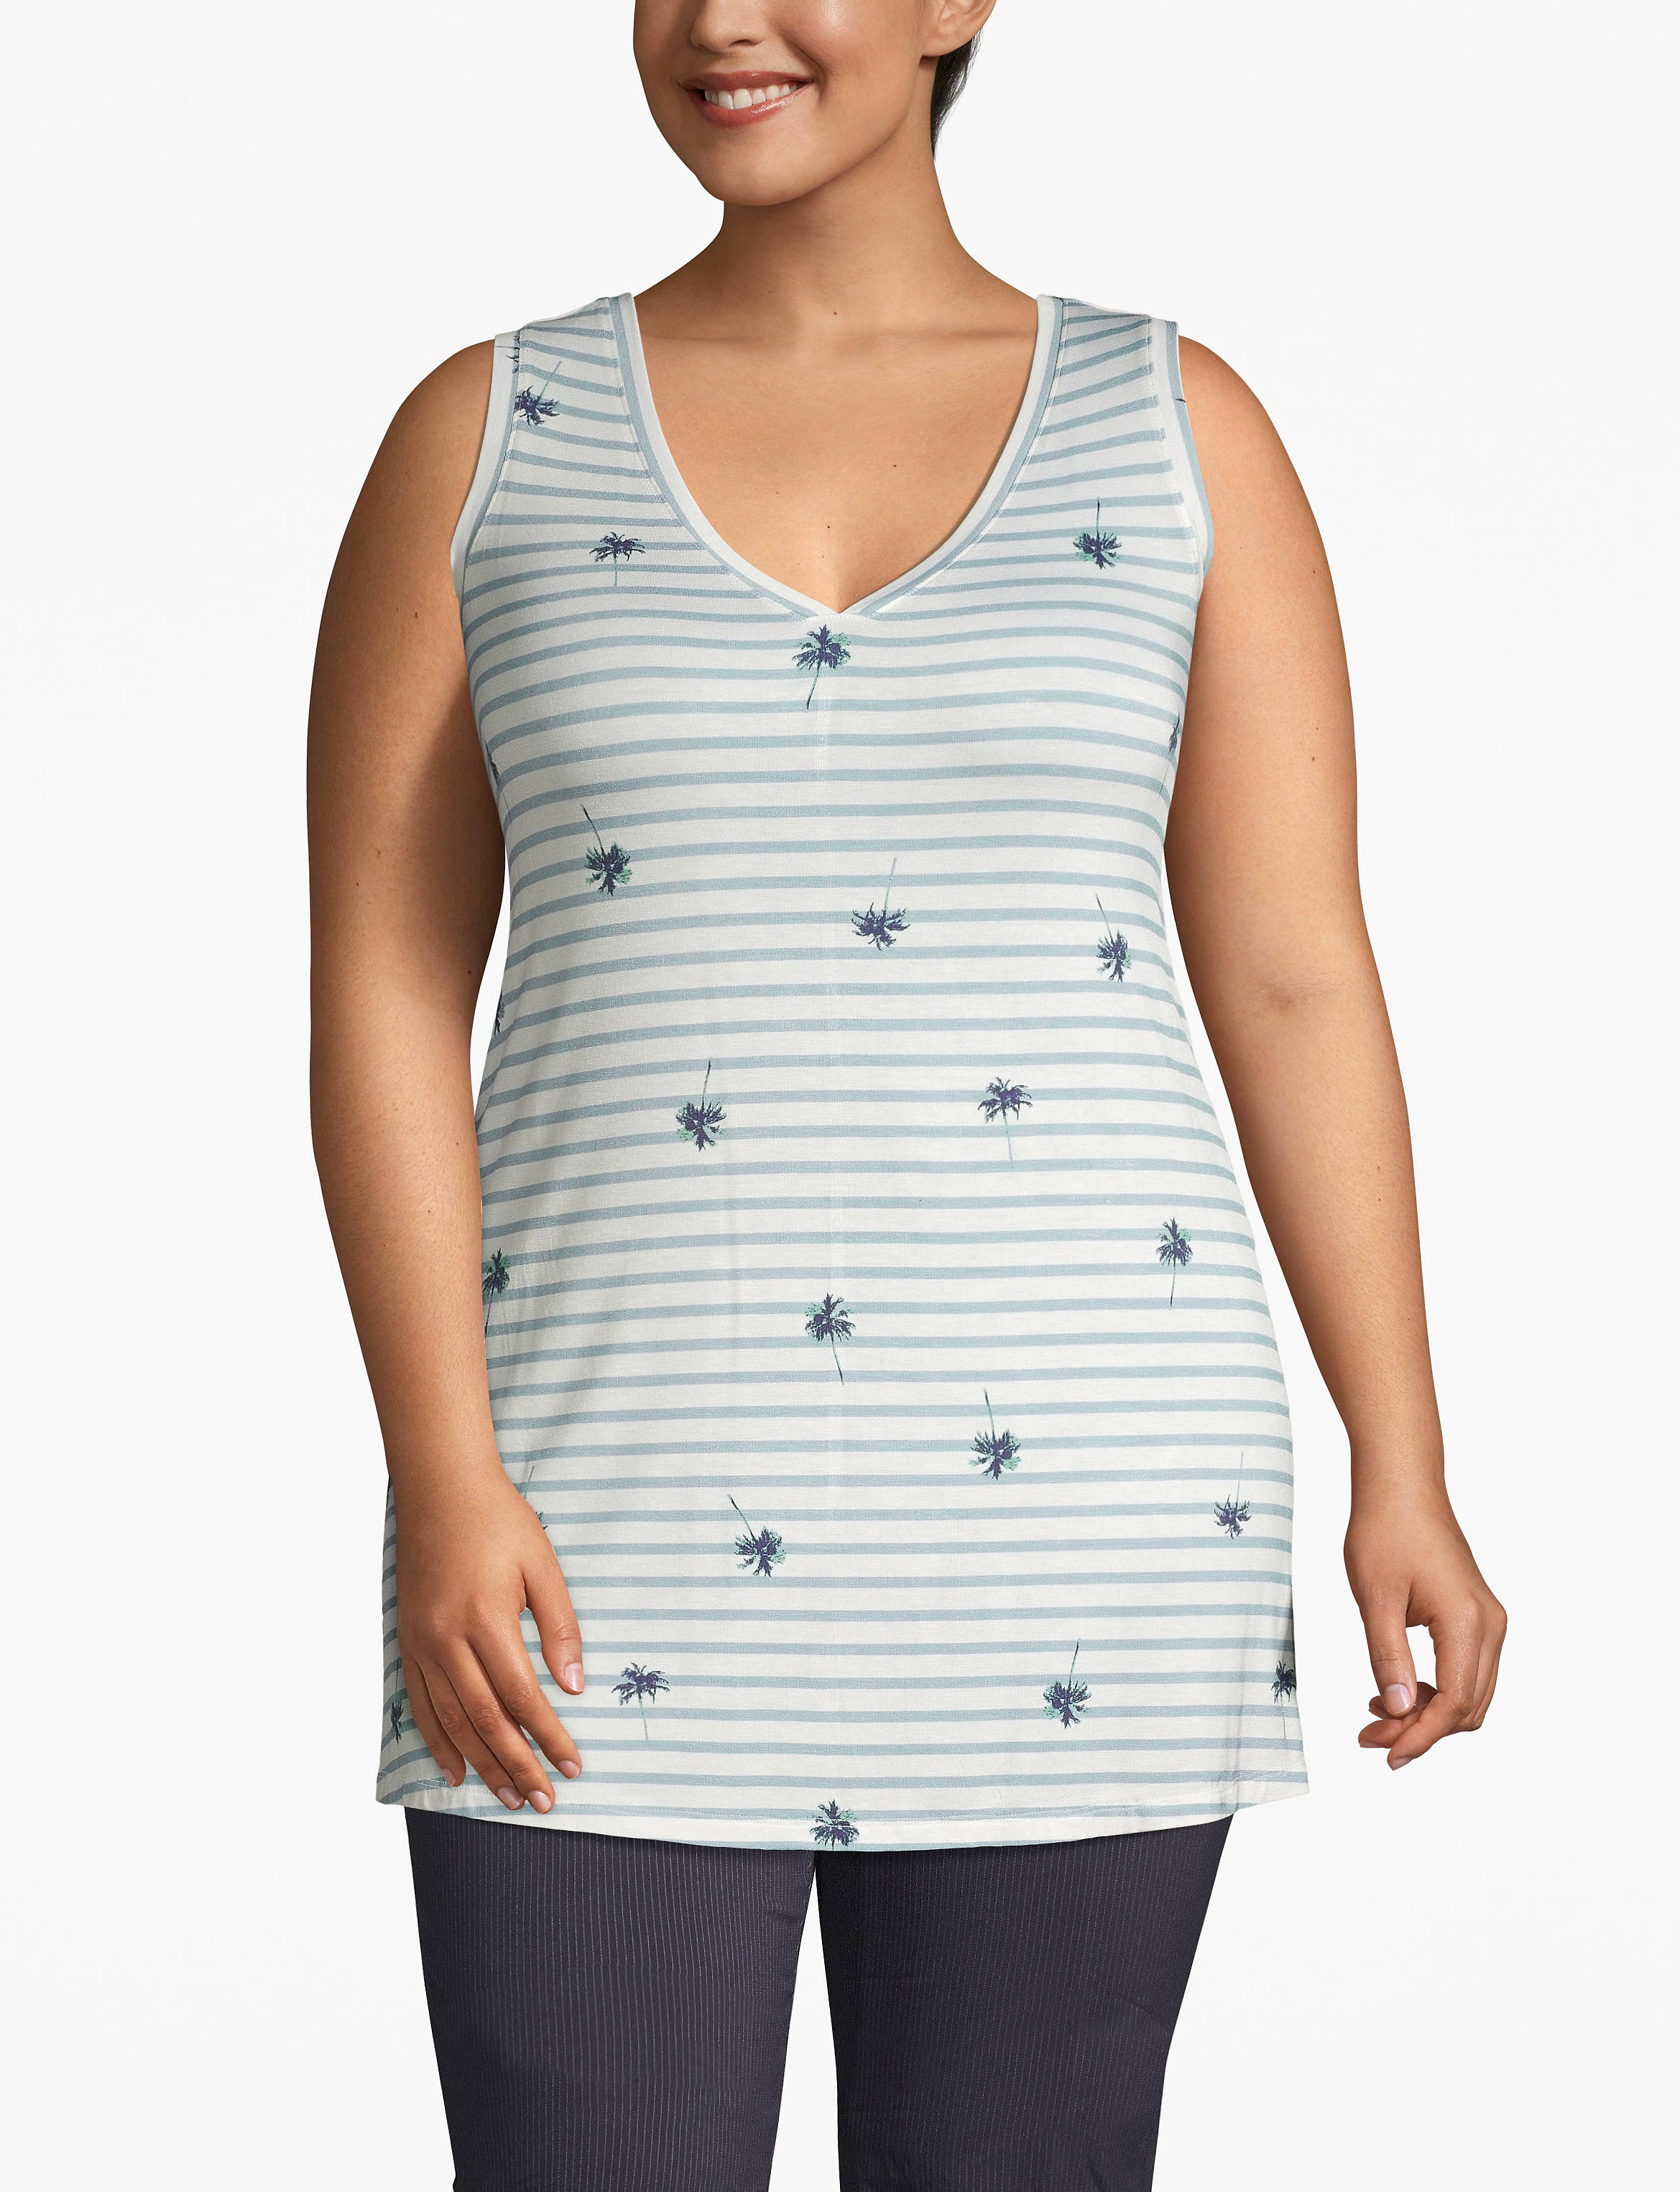 1112140- S LBO V Neck Swing Tank (1111779):LBSU20214_ScatteredPalmStripe_colorway1:14/16 Product Image 1